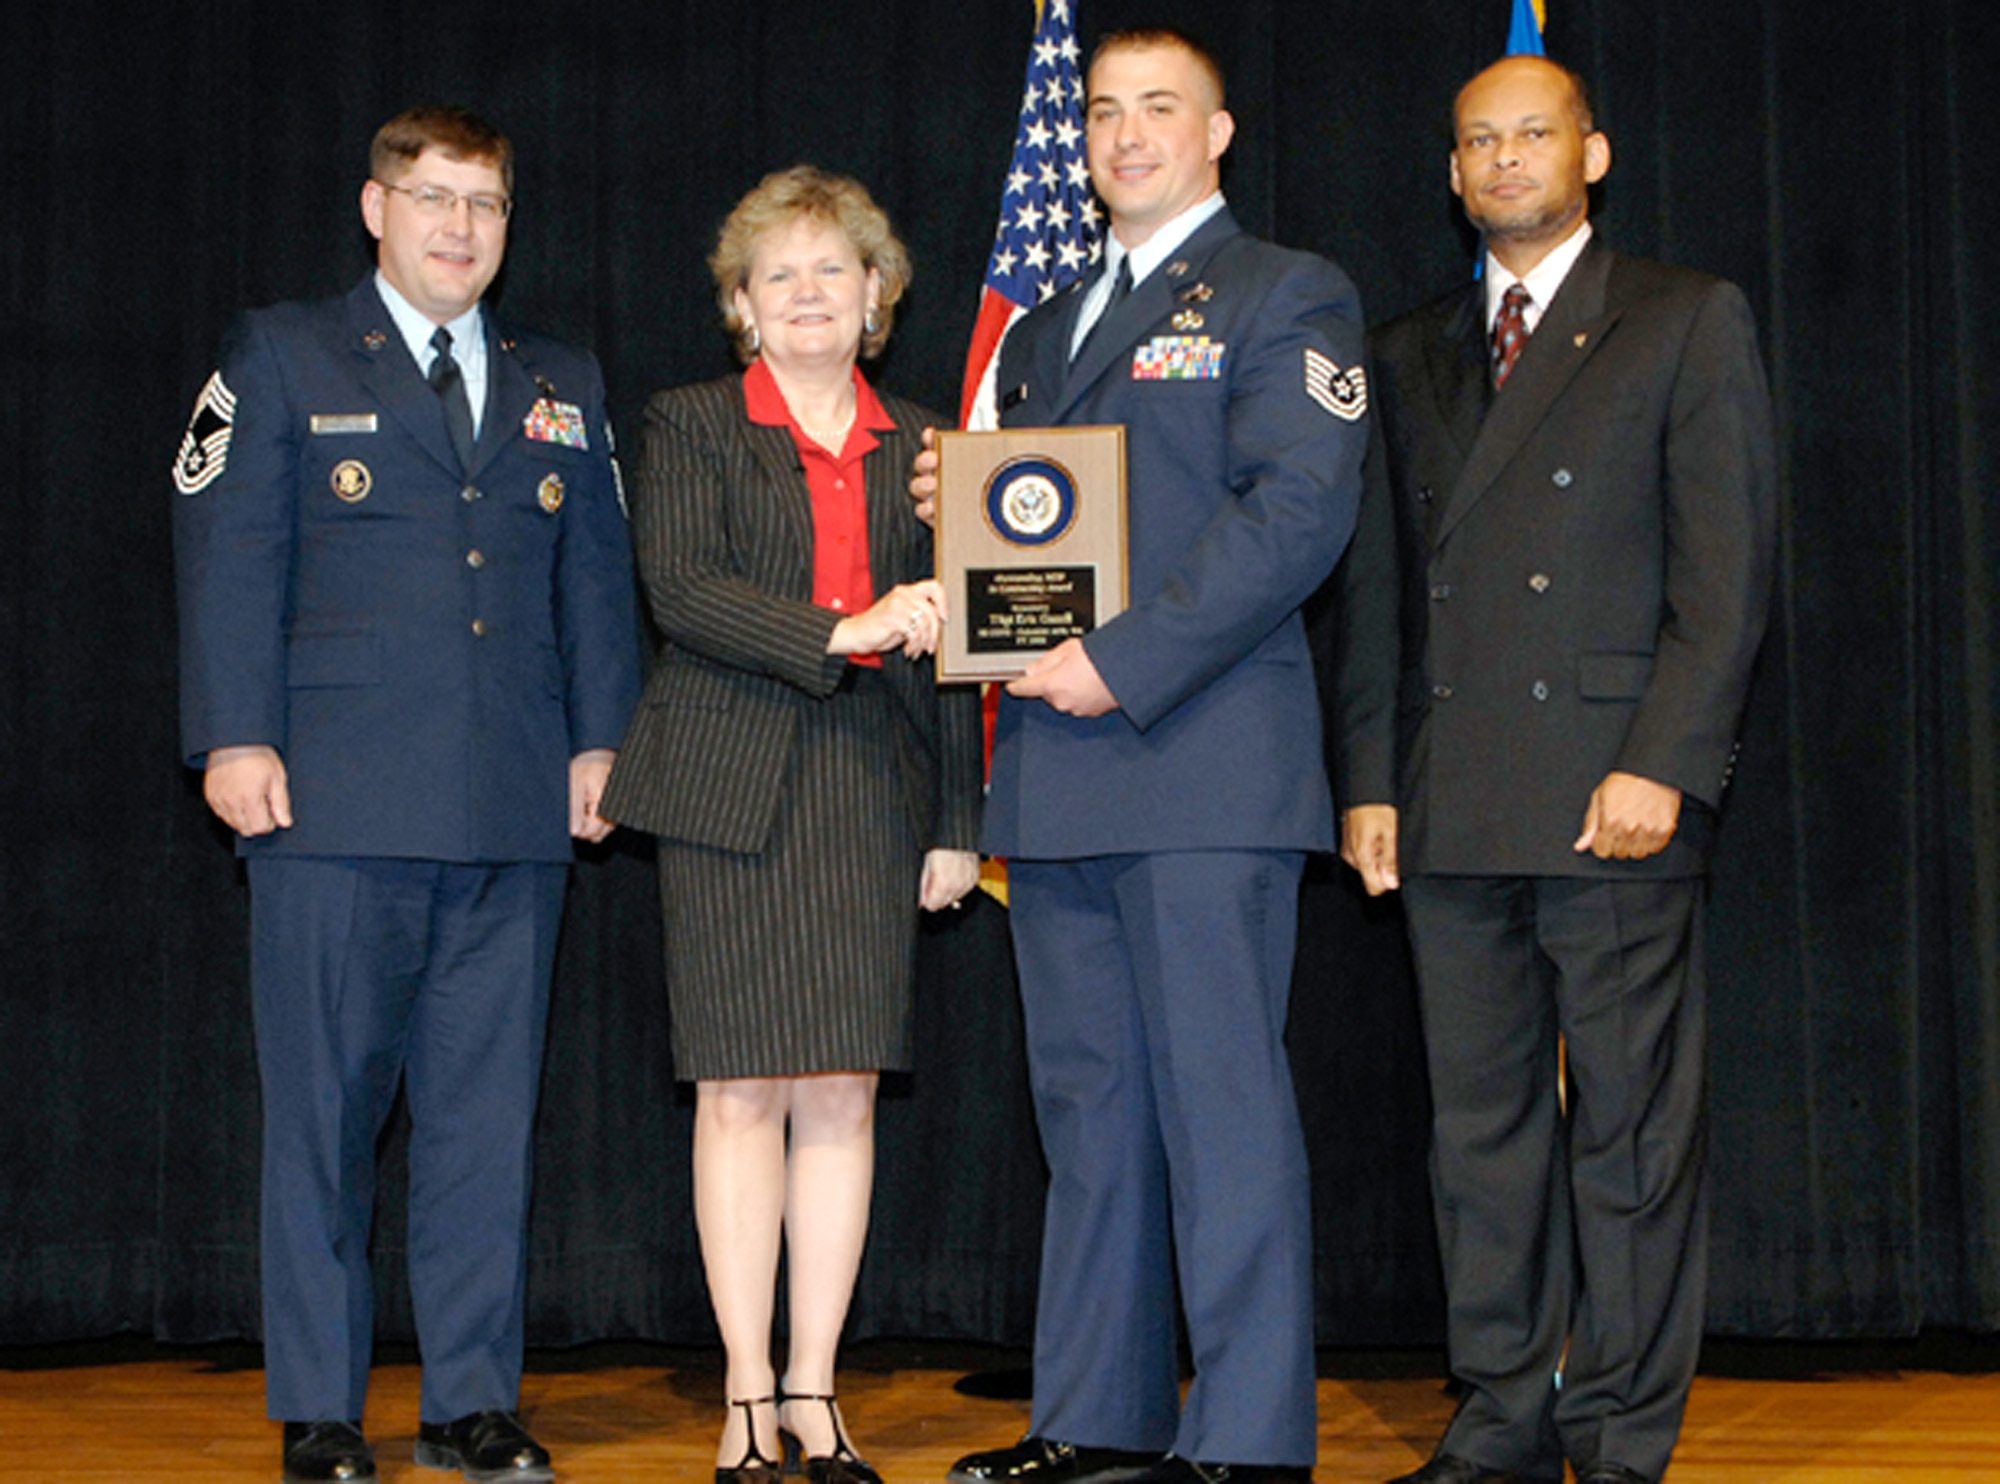 WASHINGTON – Tech. Sgt. Eric Gazell, 92nd Contracting Squadron contracting specialist, receives the Air Force Outstanding NCO in Contracting Award from the Assistant Secretary of the Air Force for Acquisition Sue Payton and the Deputy Assistant of Contracting Charlie Williams during an award ceremony at the Pentagon Auditorium in Washington D.C. Sergeant Gazell received the award for his exceptional performance at Fairchild and while deployed. (Courtesy photo)